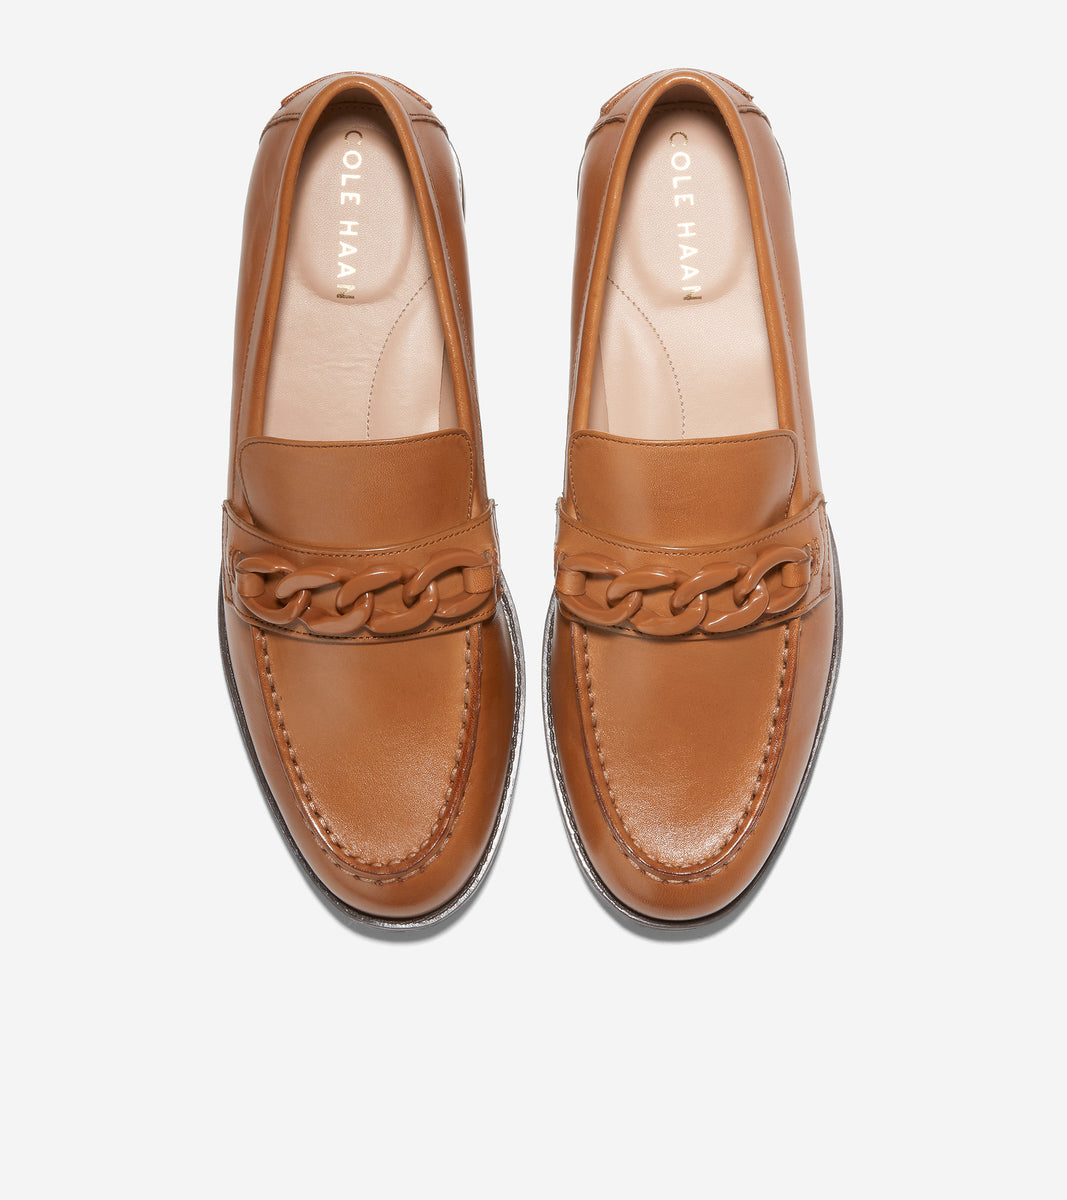 w27245-Women's Stassi Chain Loafer-Pecan Leather